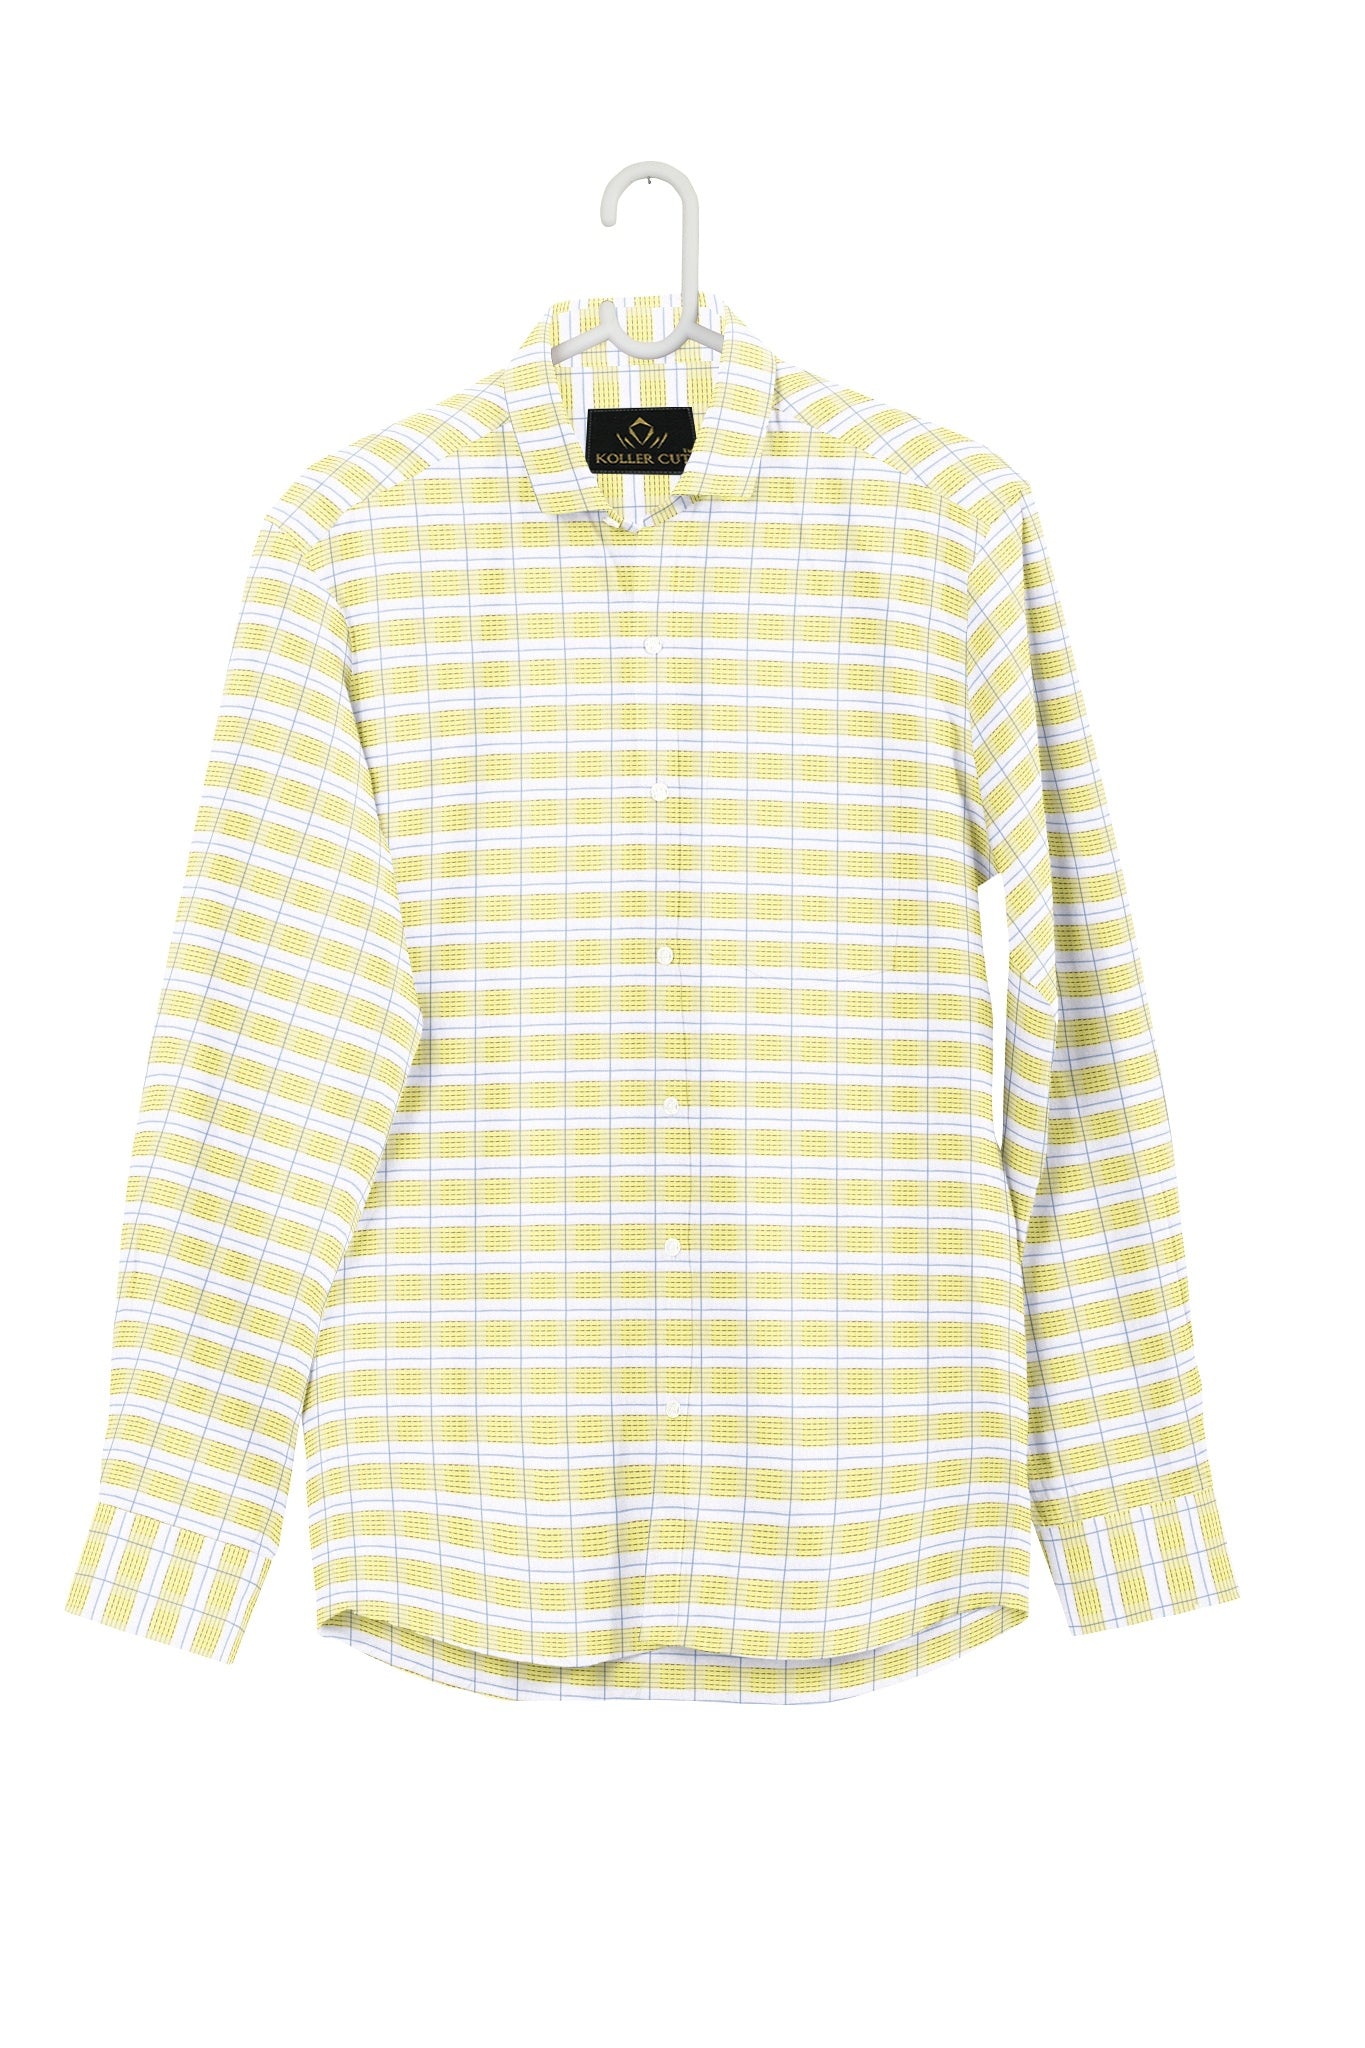 White with Tender Yellow and Frost Gray Jacquard Checks Egyptian Giza Cotton Shirt